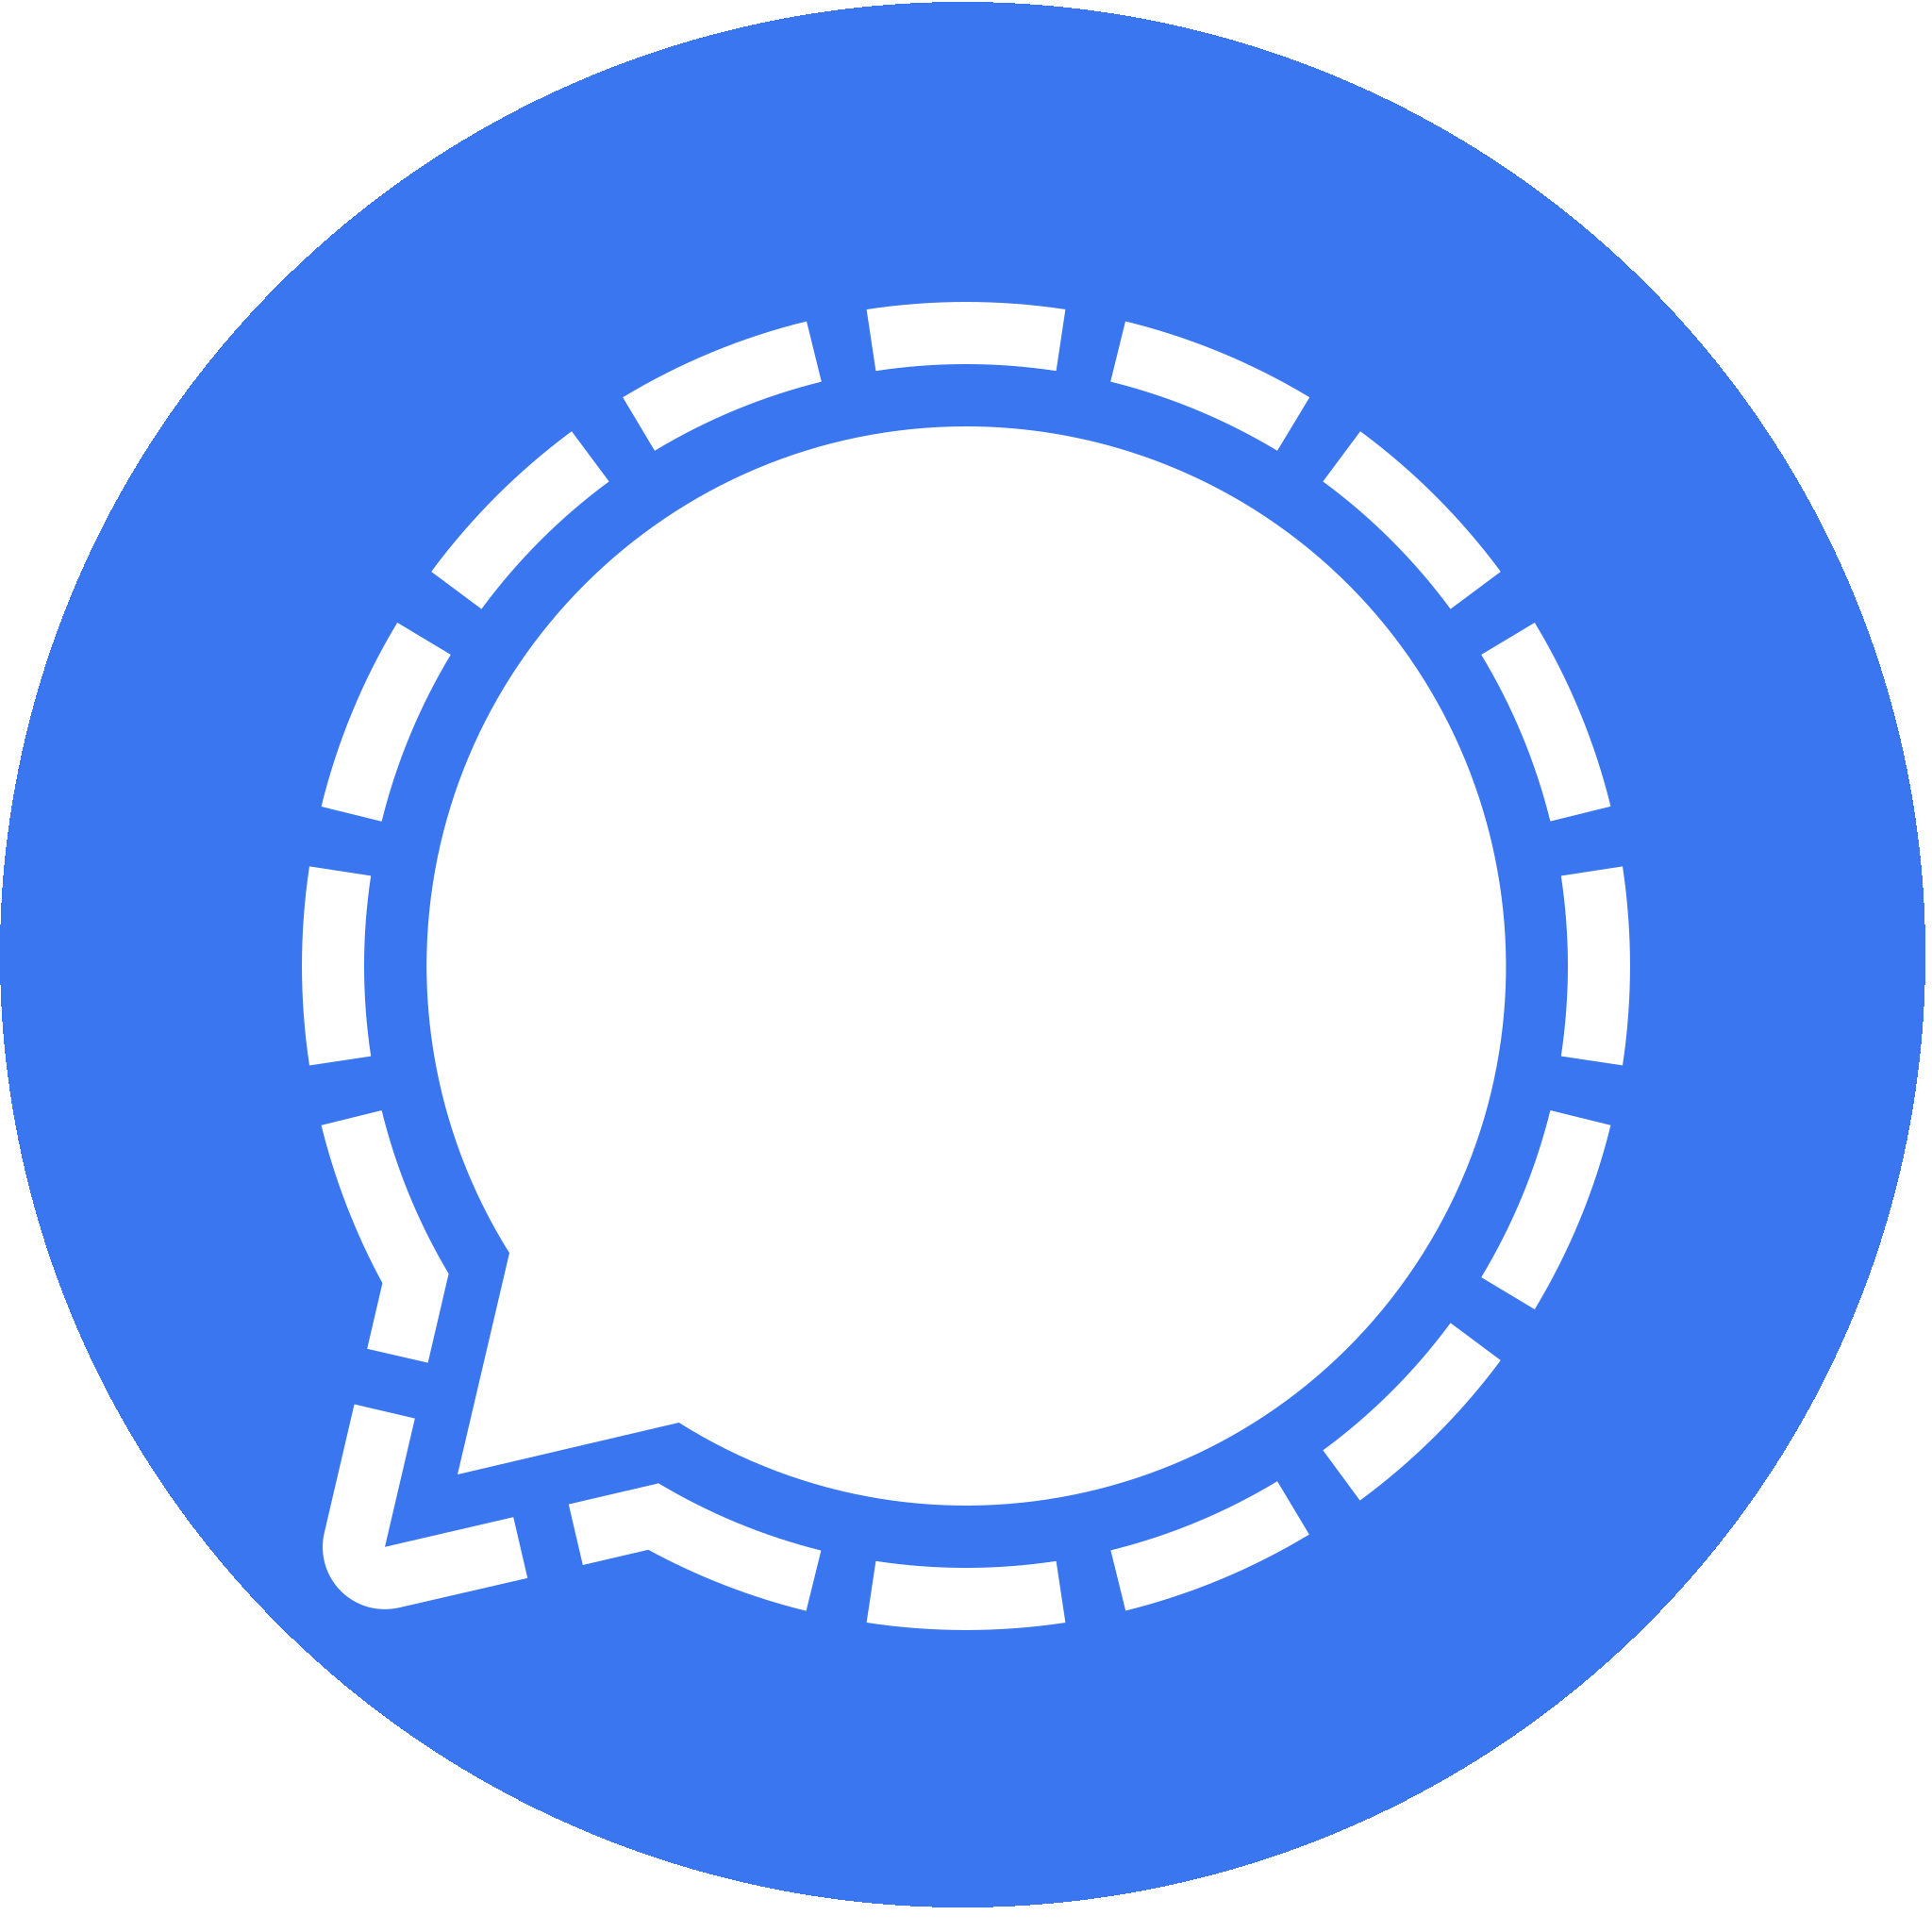 Signal Foundation logo showing a speech bubble on a blue background